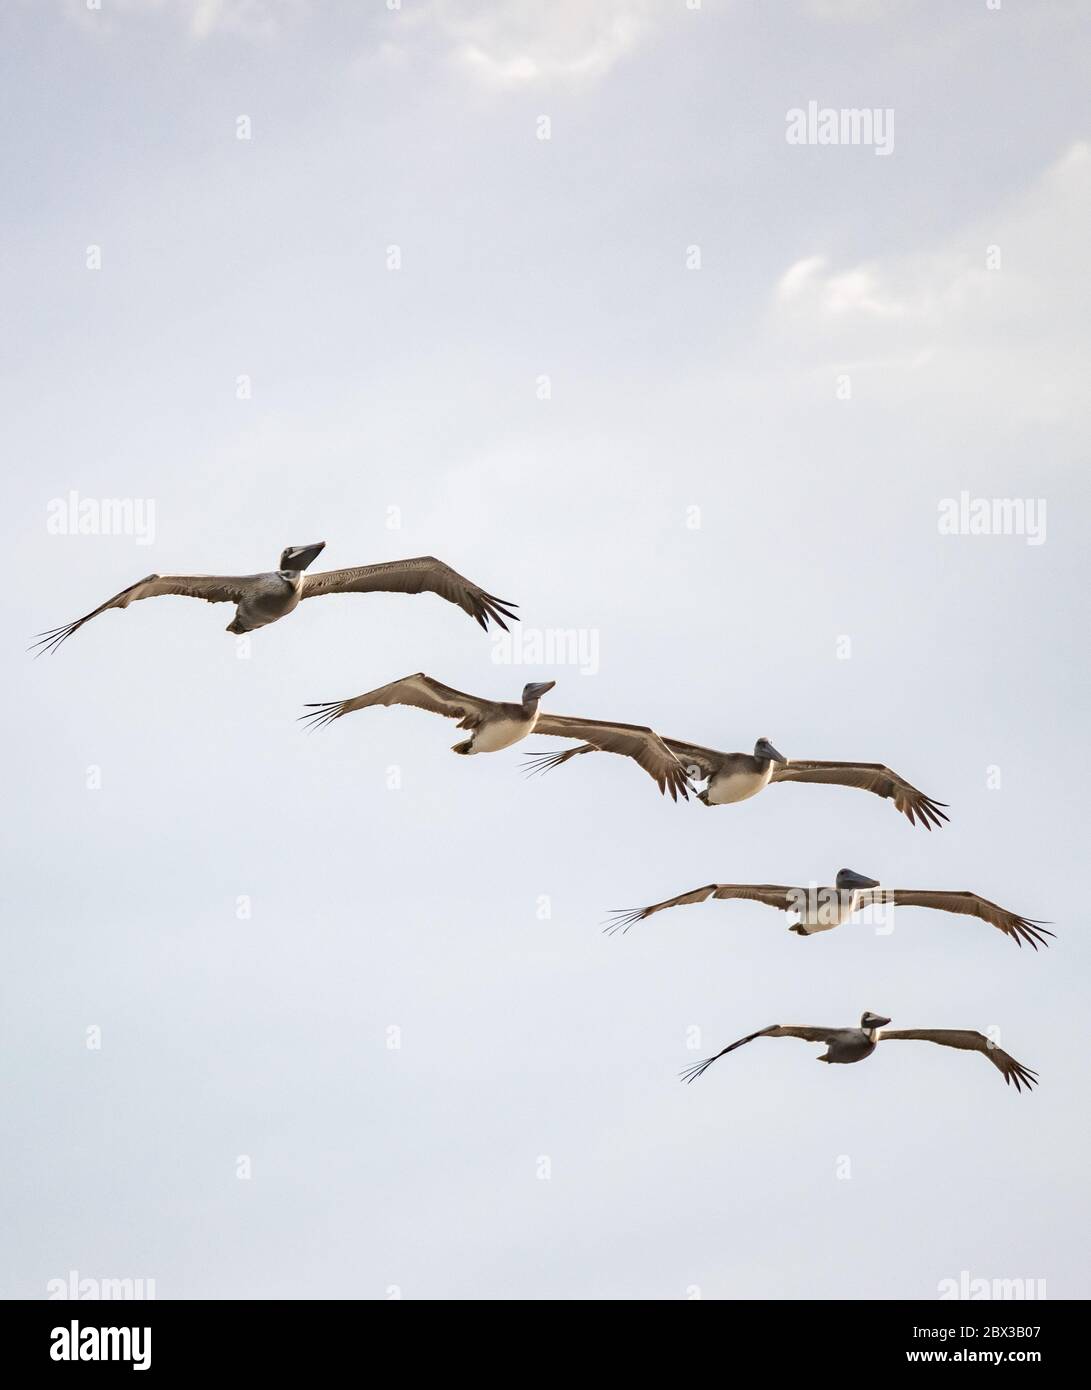 A group of pelicans flying on tight formation Stock Photo